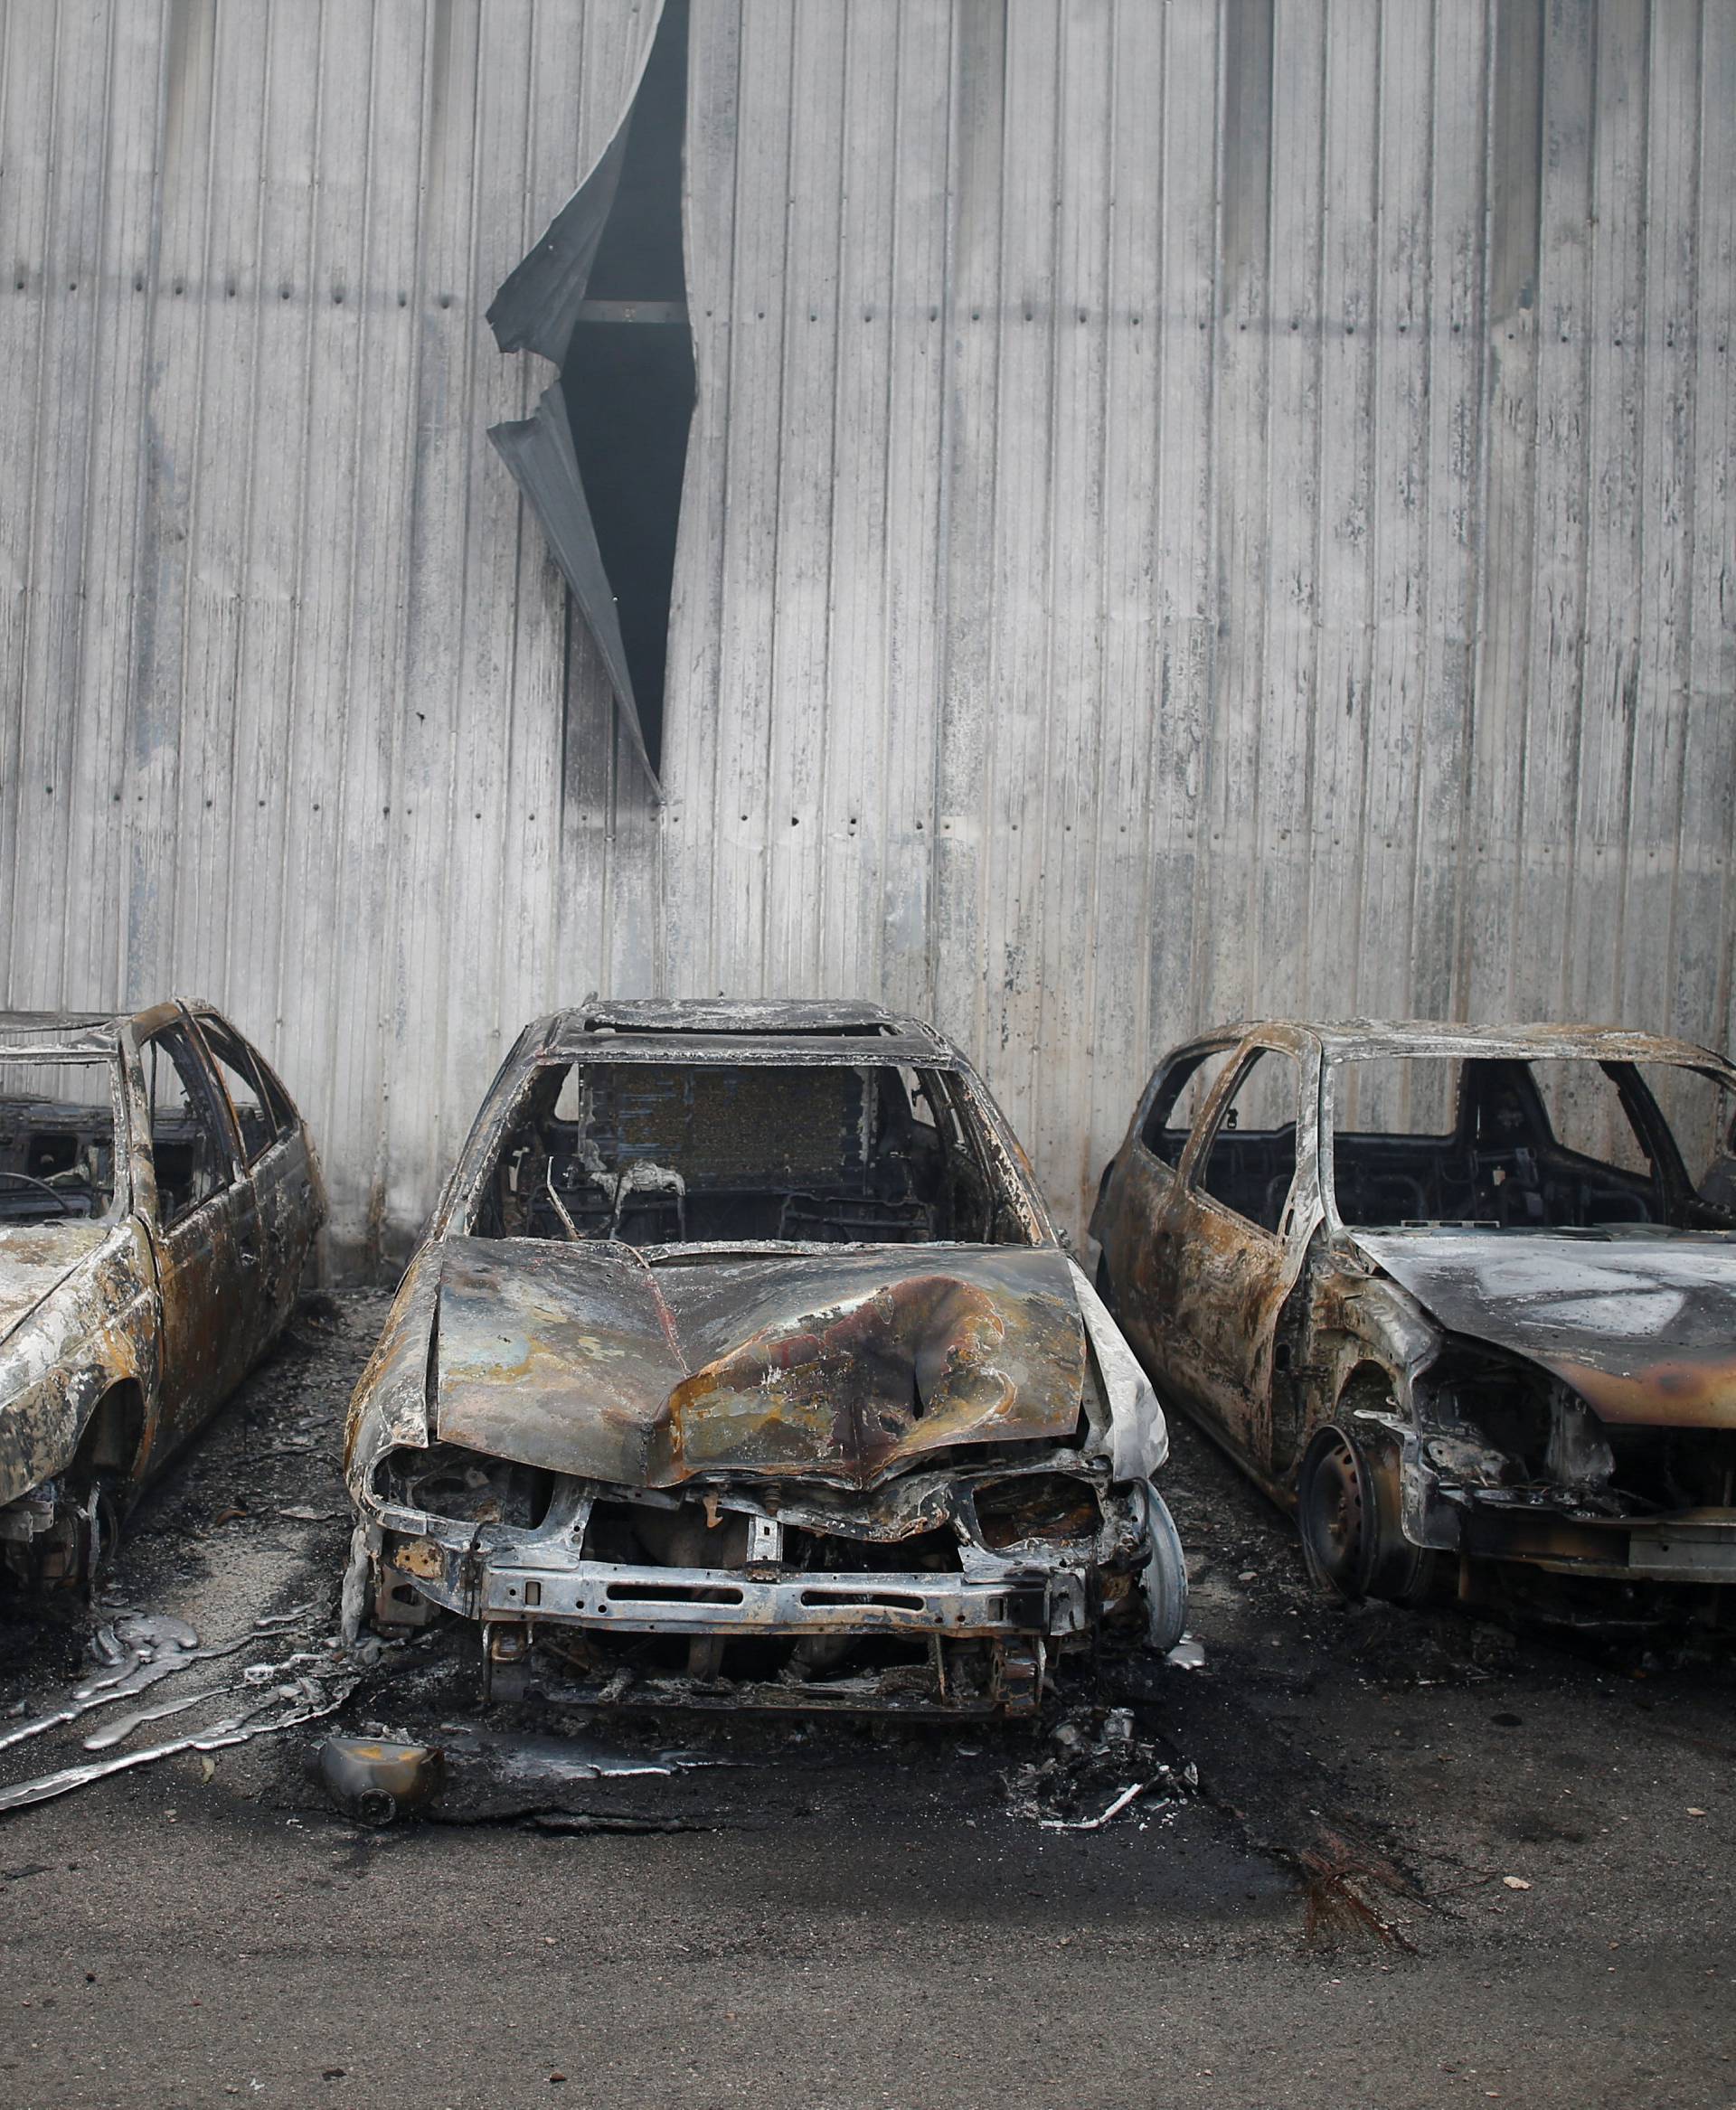 Burnt vehicles are seen after a forest fire in Miro, near Penacova